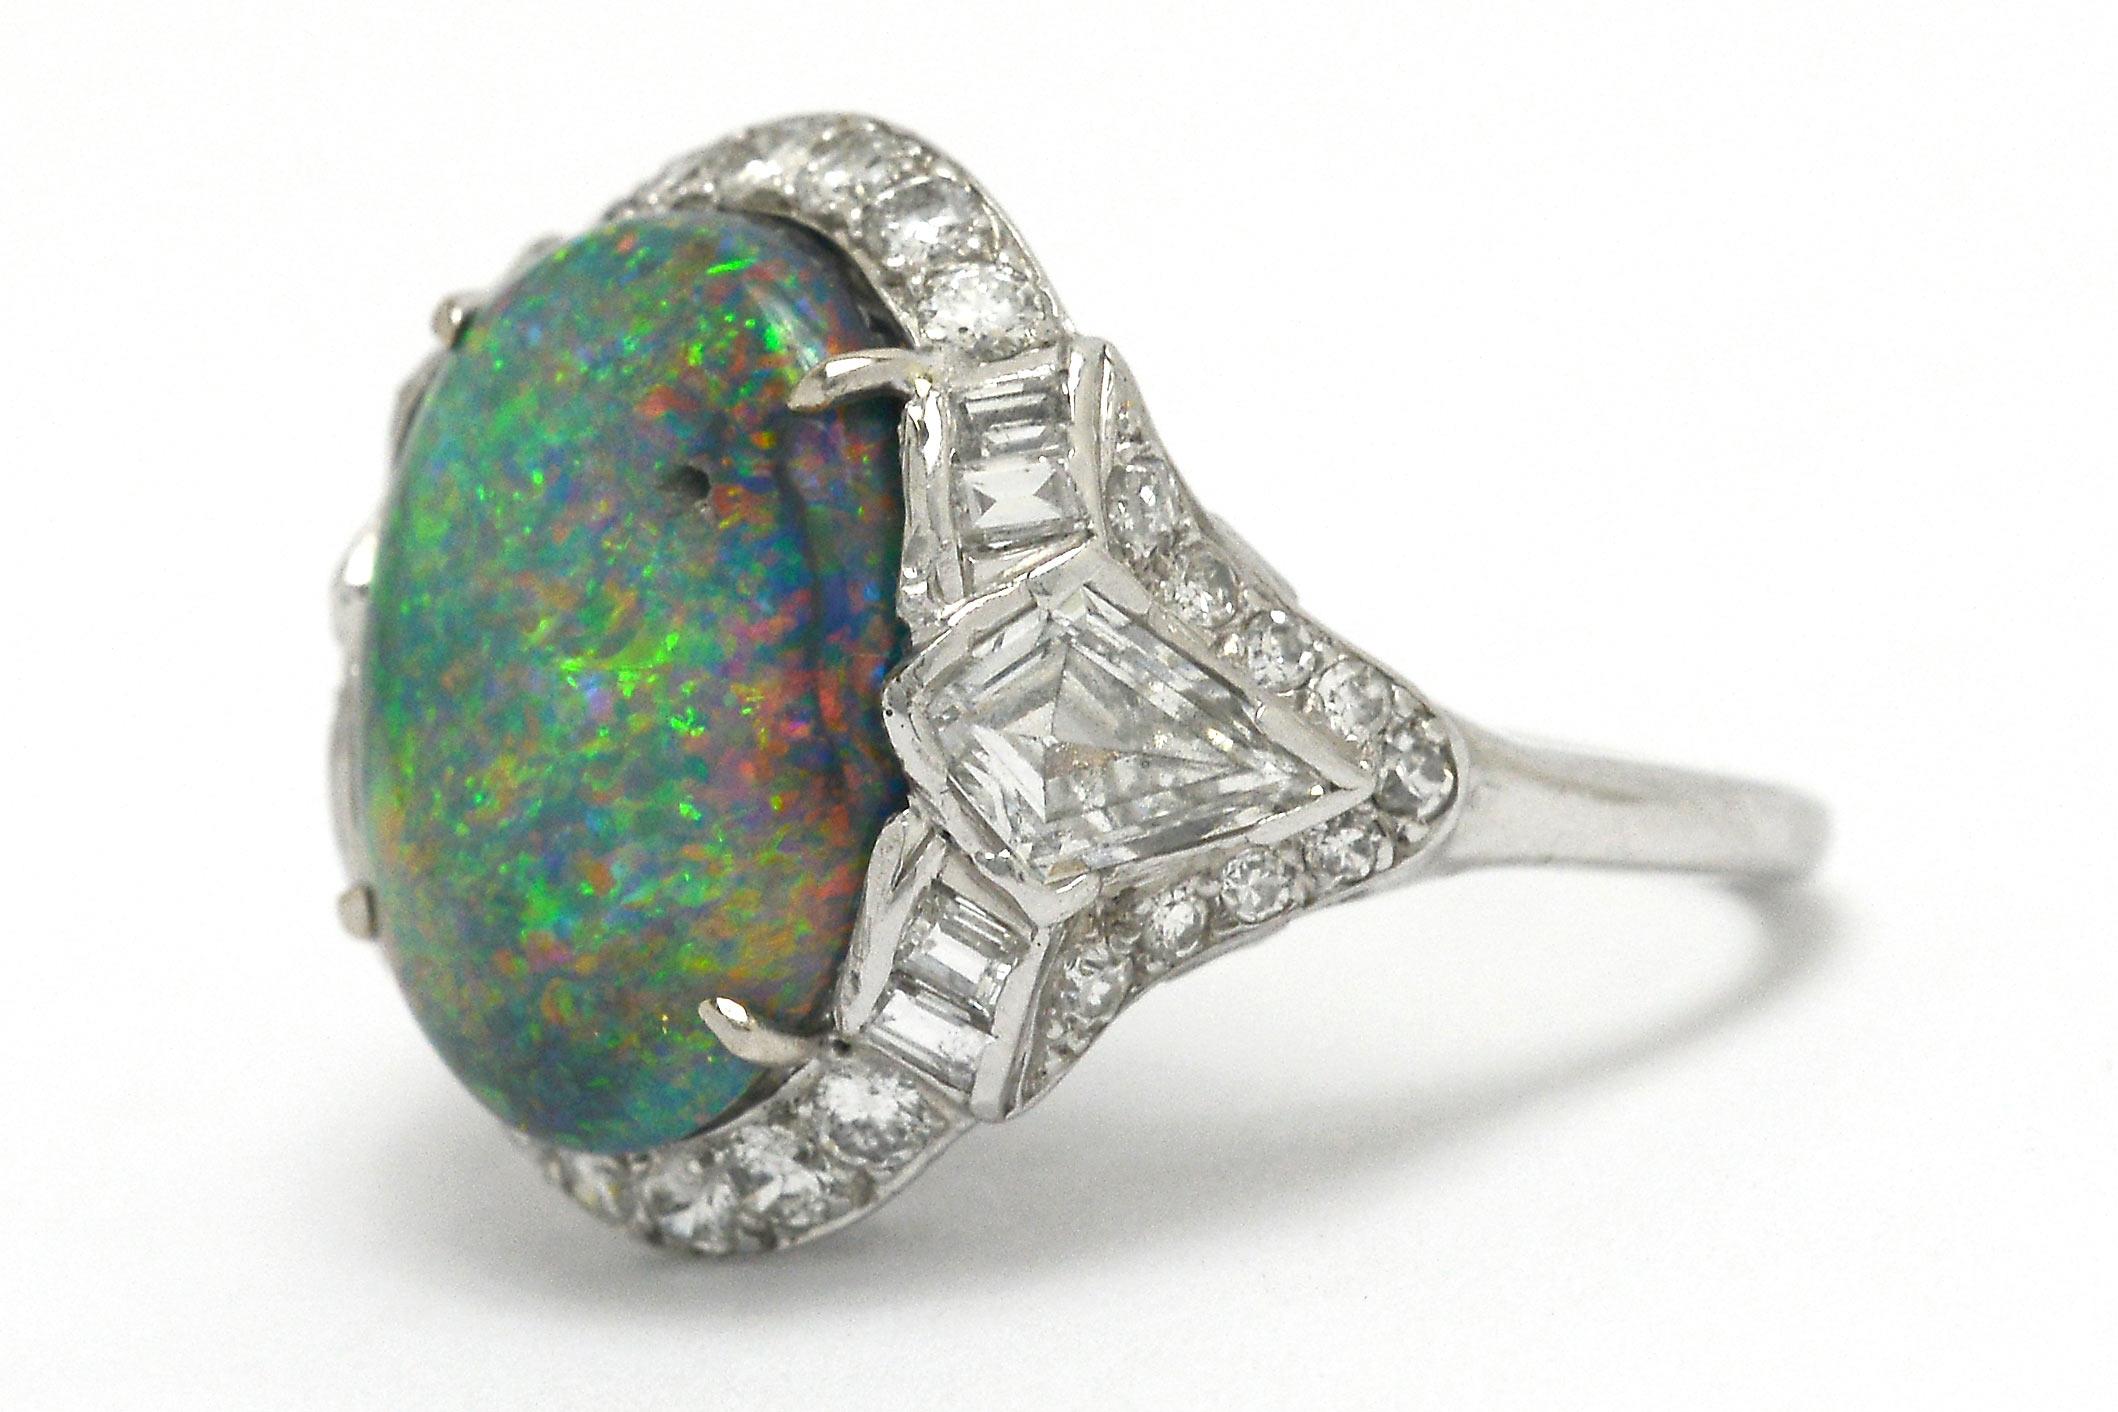 Oval Cut Art Deco 6.76 Carat Black Opal Cocktail Ring GIA Certified For Sale